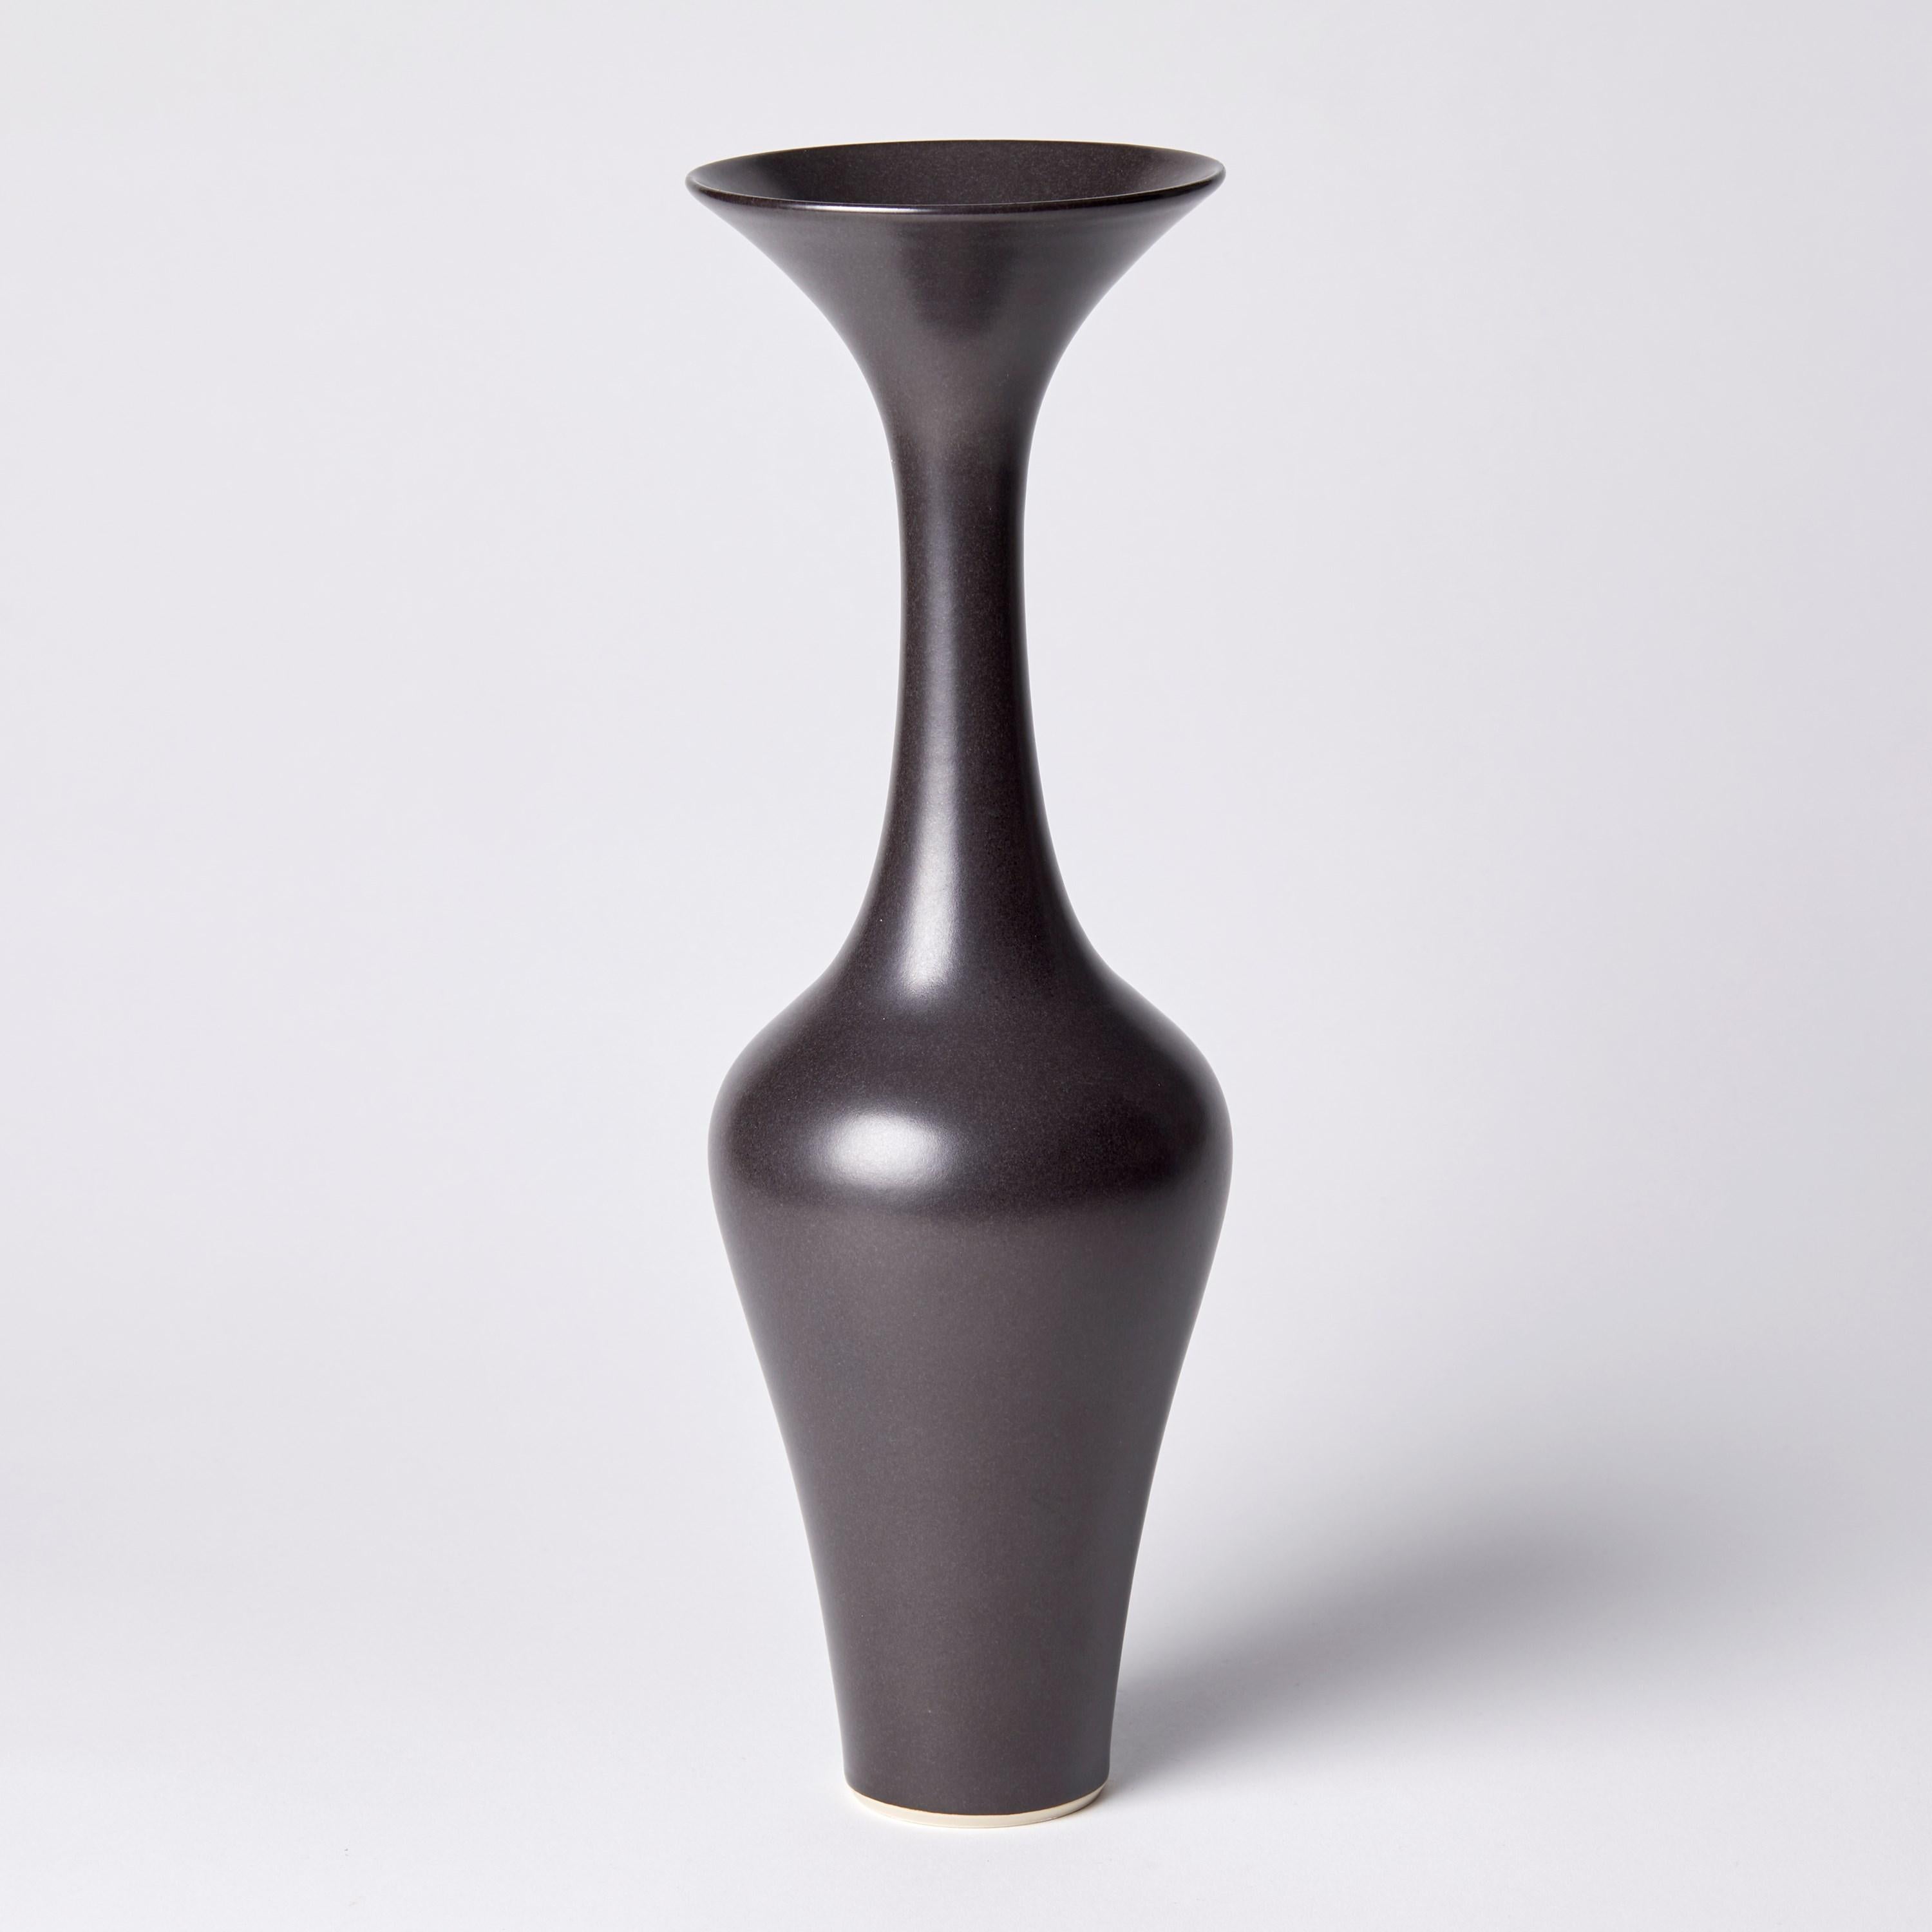 ‘Black Classic Vase III' is a unique porcelain sculptural vessel by the British artist, Vivienne Foley, which has been released from her own personal archive of artworks. 

Vivienne Foley is based in Gloucestershire where she produces exquisite